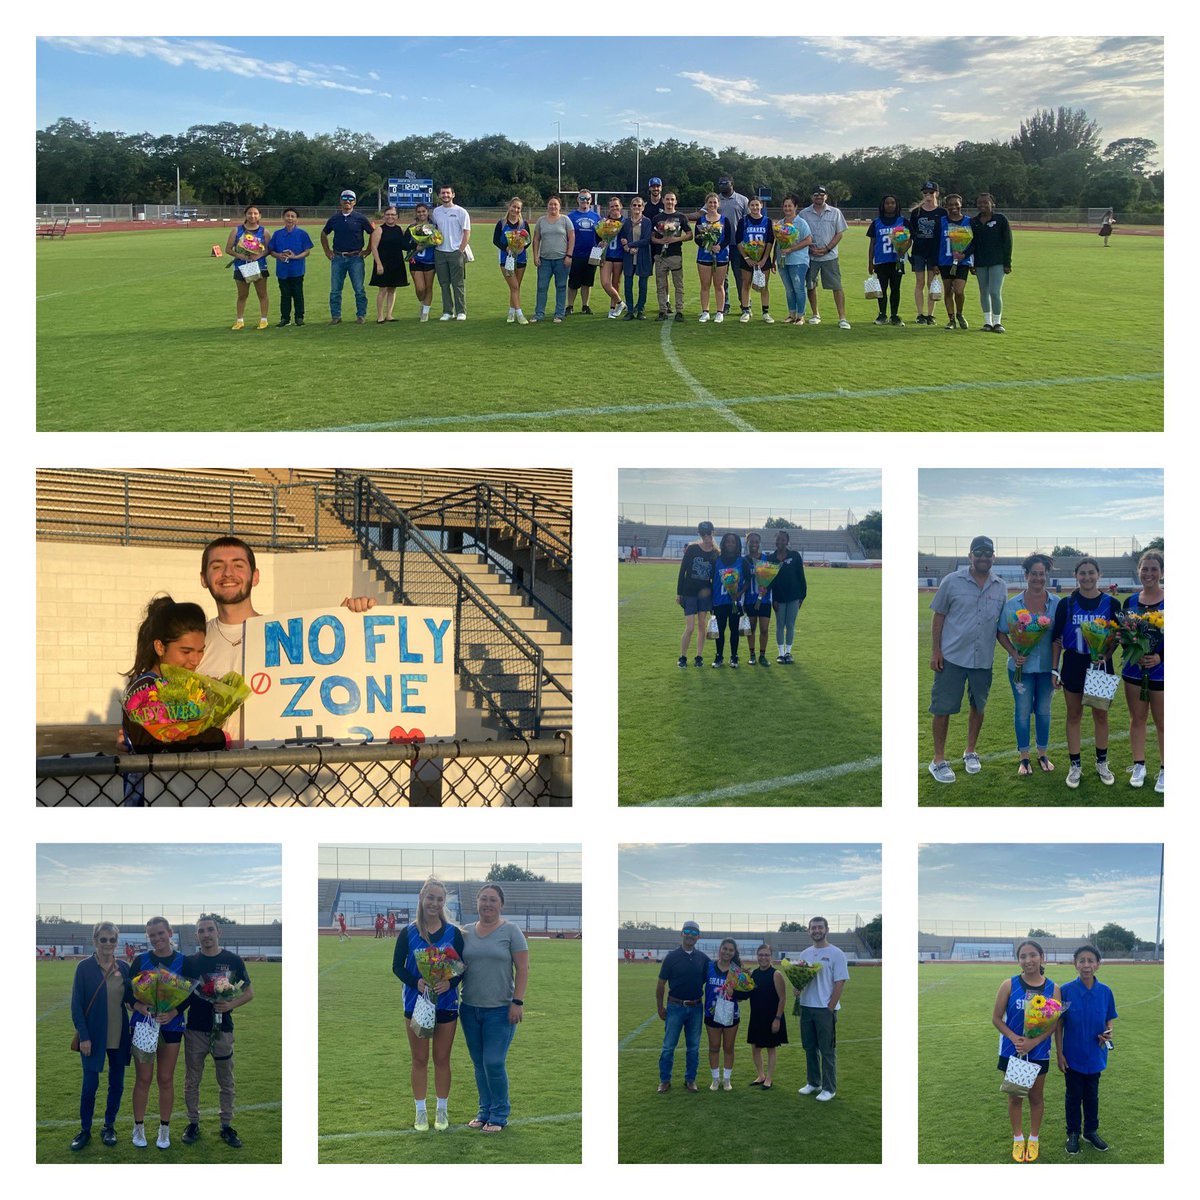 Senior Night for the Lady Sharks Flag Football team with a 35-0 win. @SRHS_SHARKS @SRHS_Sport